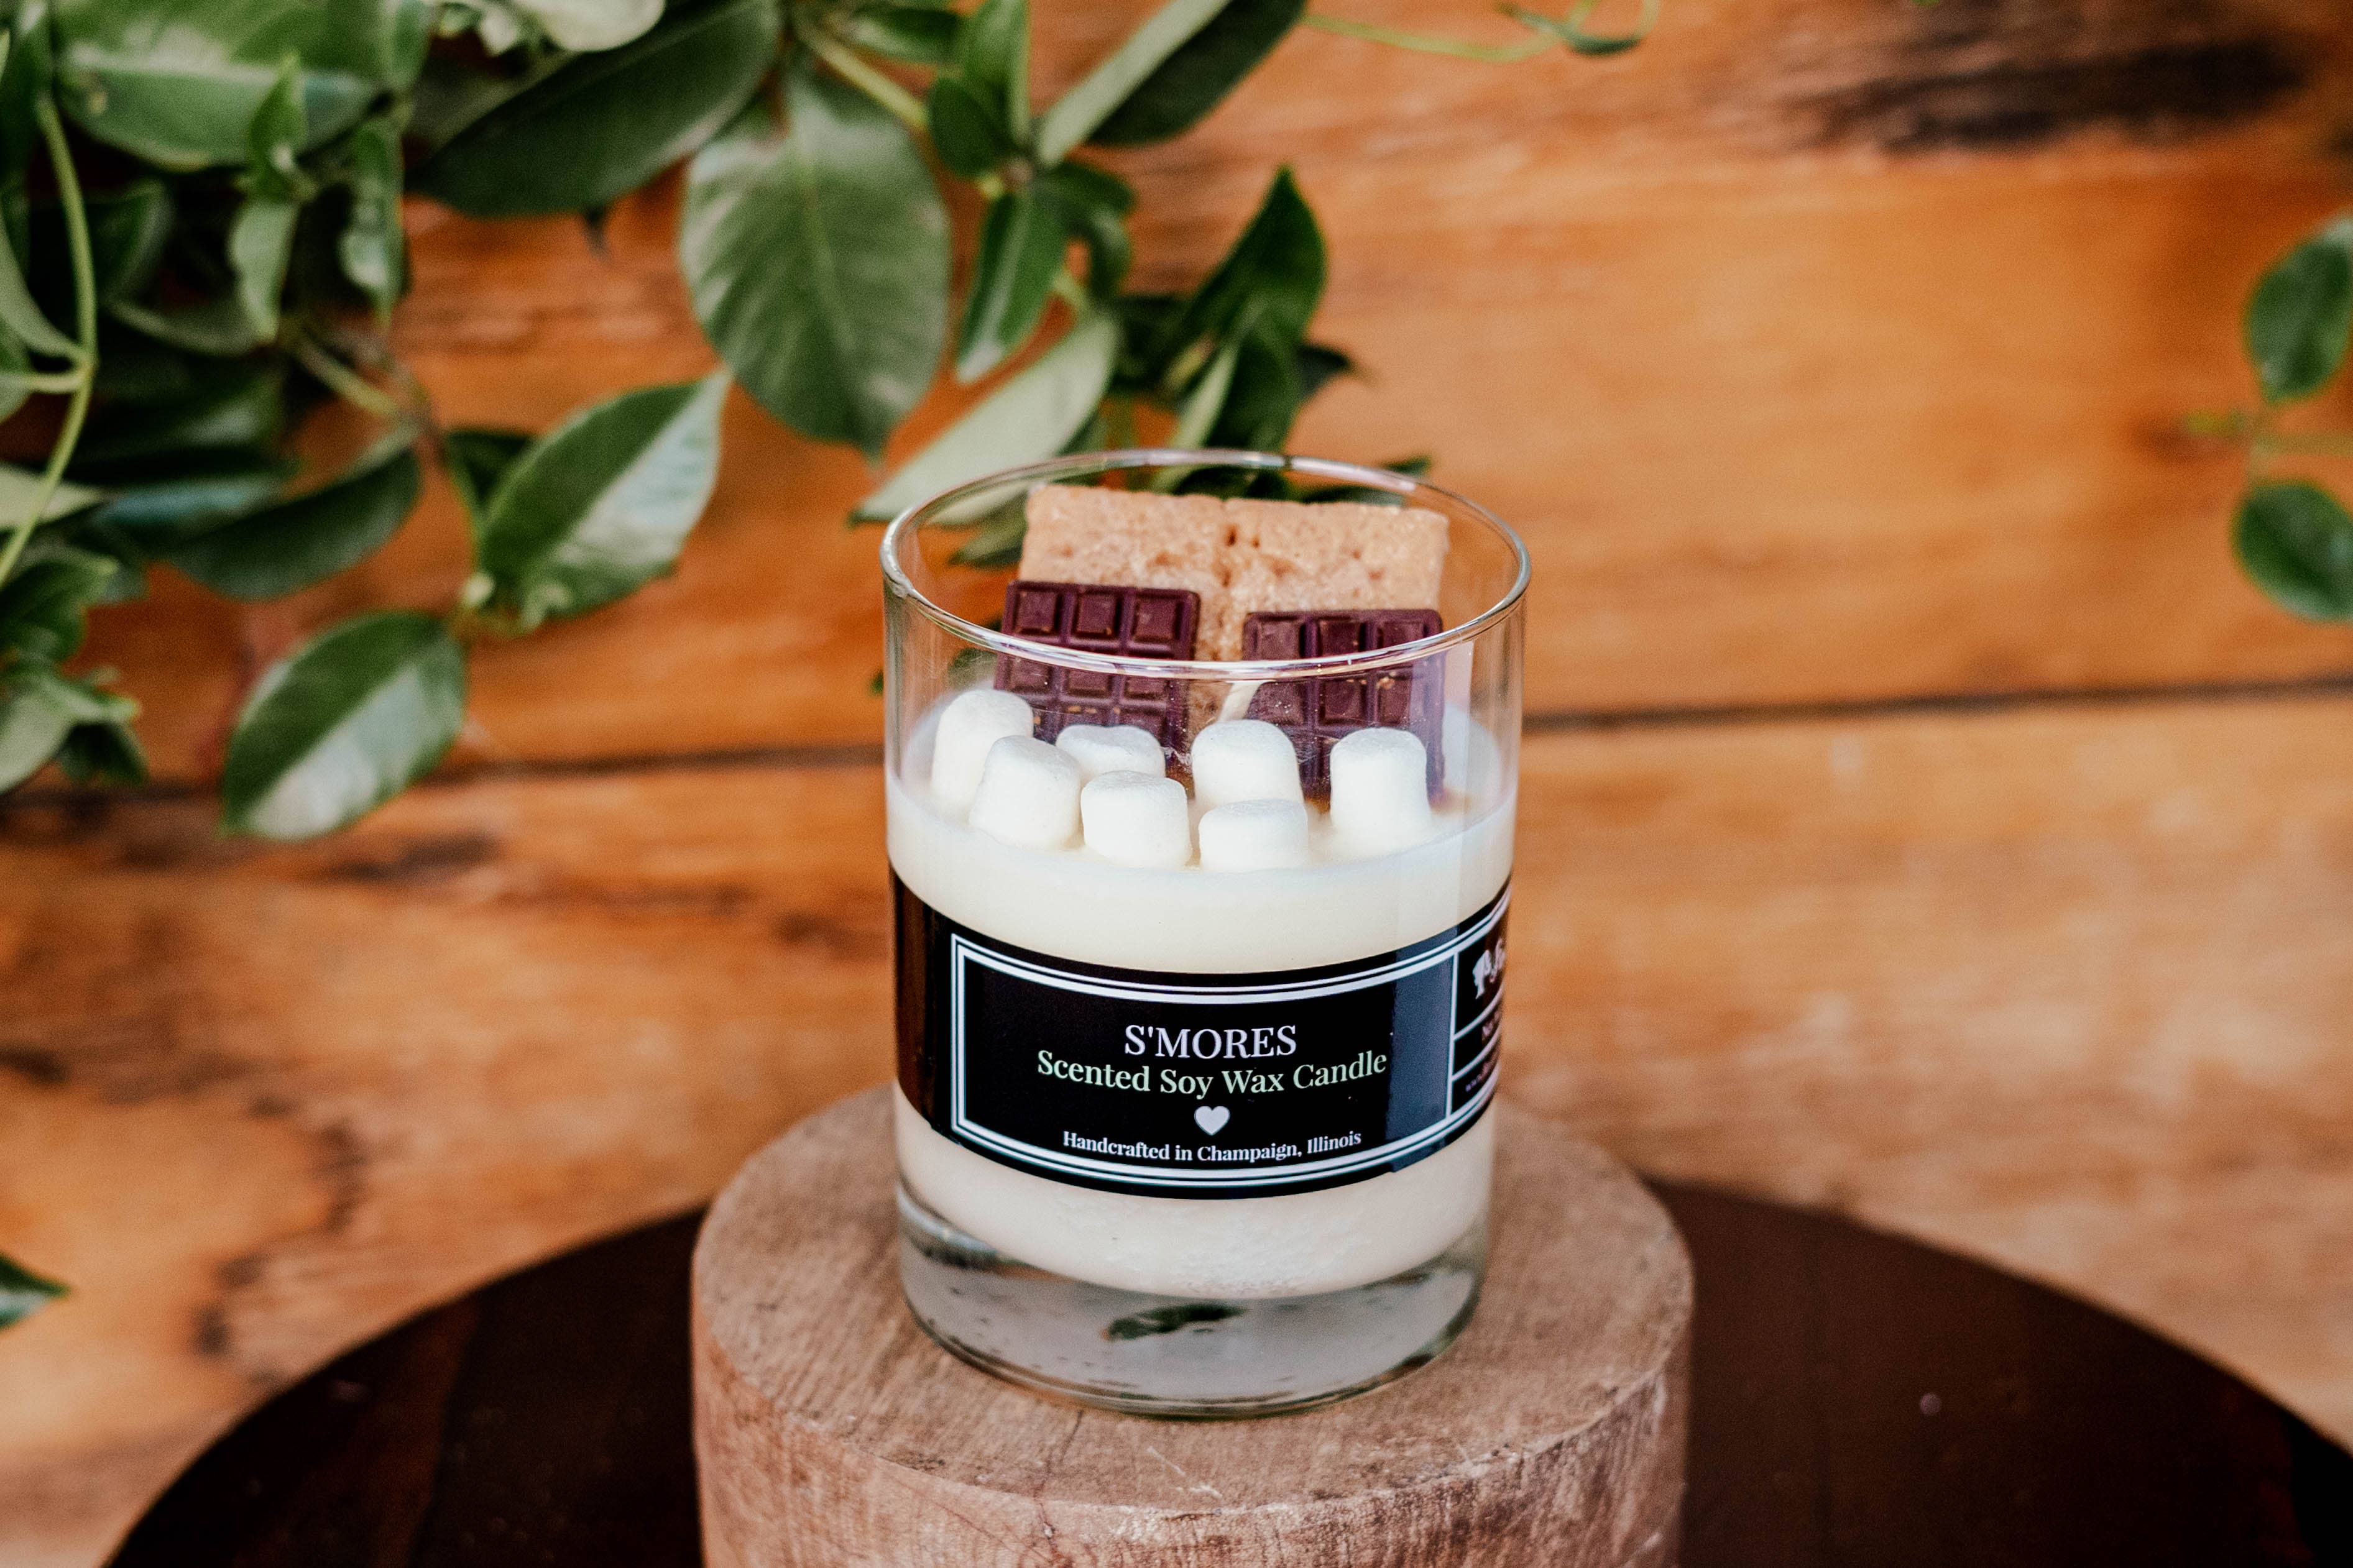 8 oz S'mores Soy Wax Candle